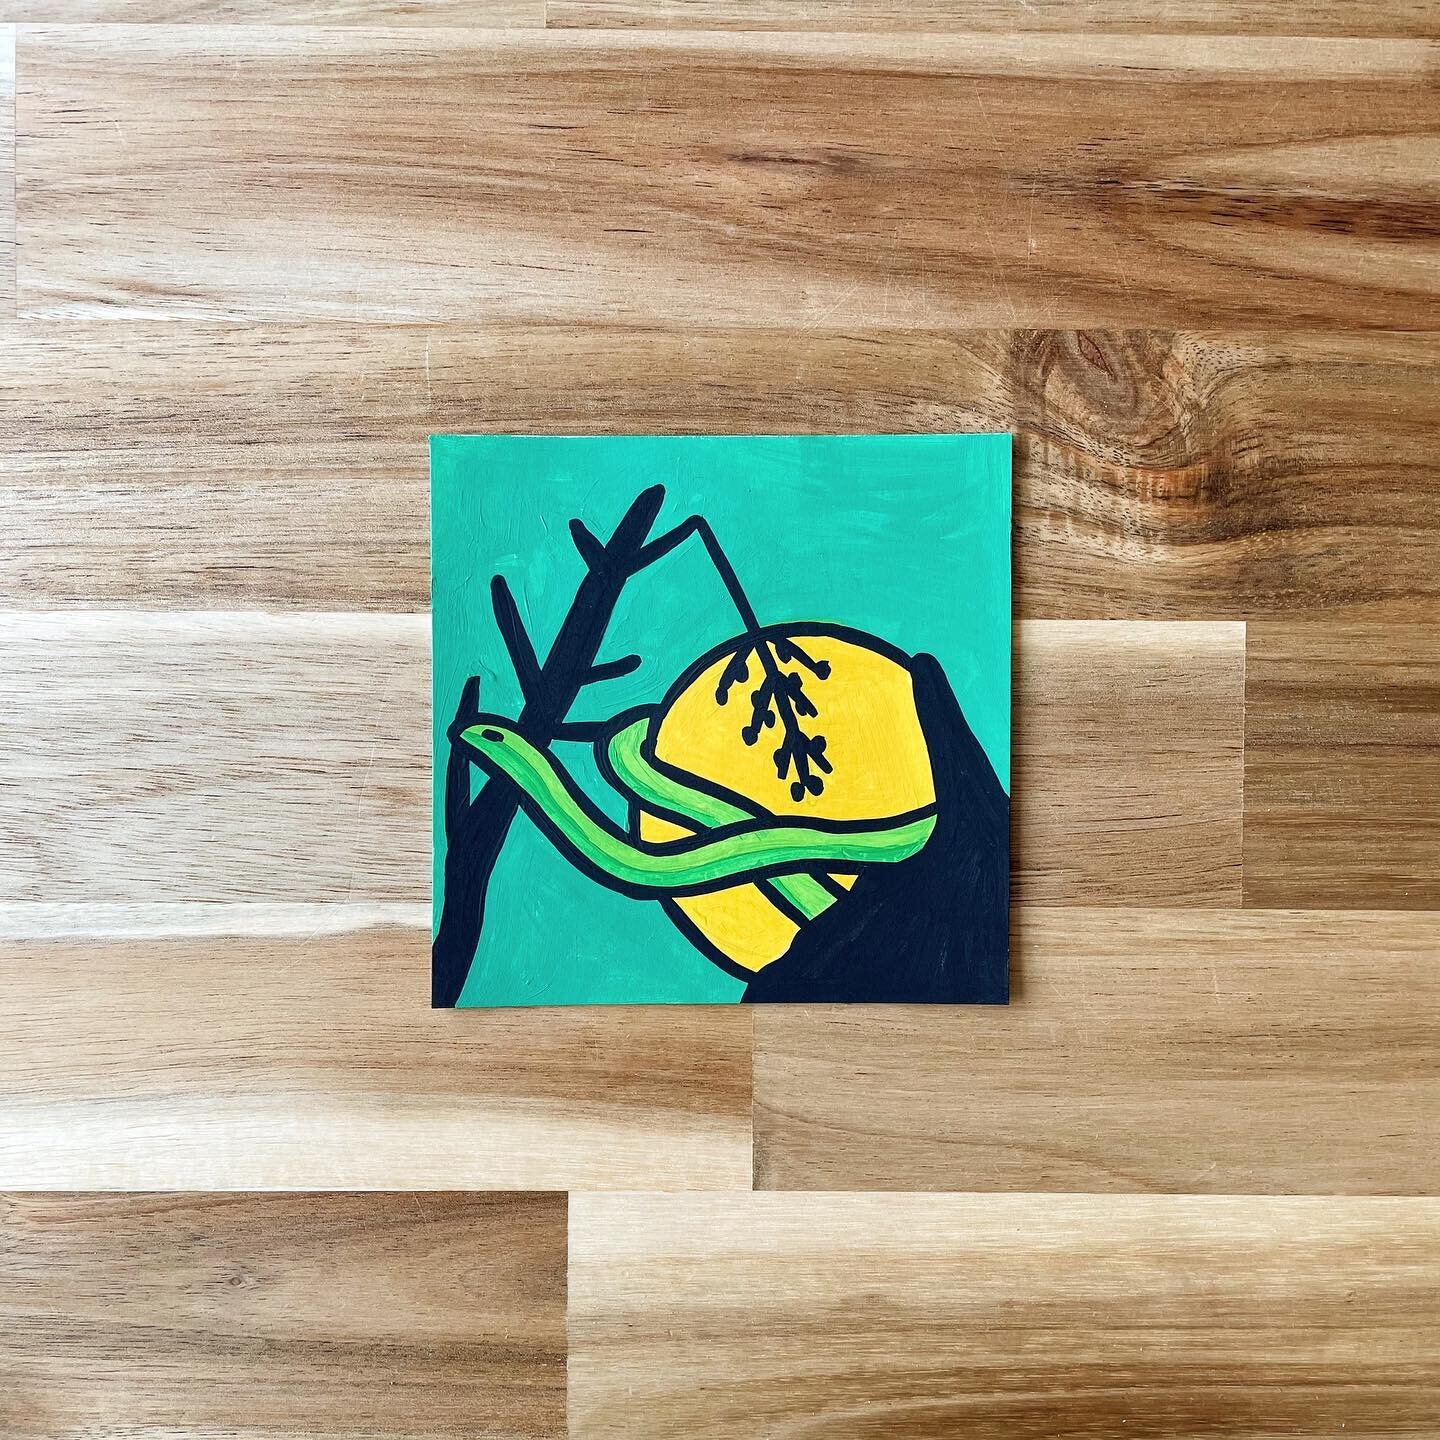 (86/100) Album &ldquo;Ganging Up On The Sun&rdquo; by @guster🔥 Painted with acrylic on 4&rdquo; x 4&rdquo; paper for my #100albumswithlaura project 🌈

Fave song &ldquo;Satellite&rdquo; brings back good memories 🥰

Scroll to see the original 🤍 Com